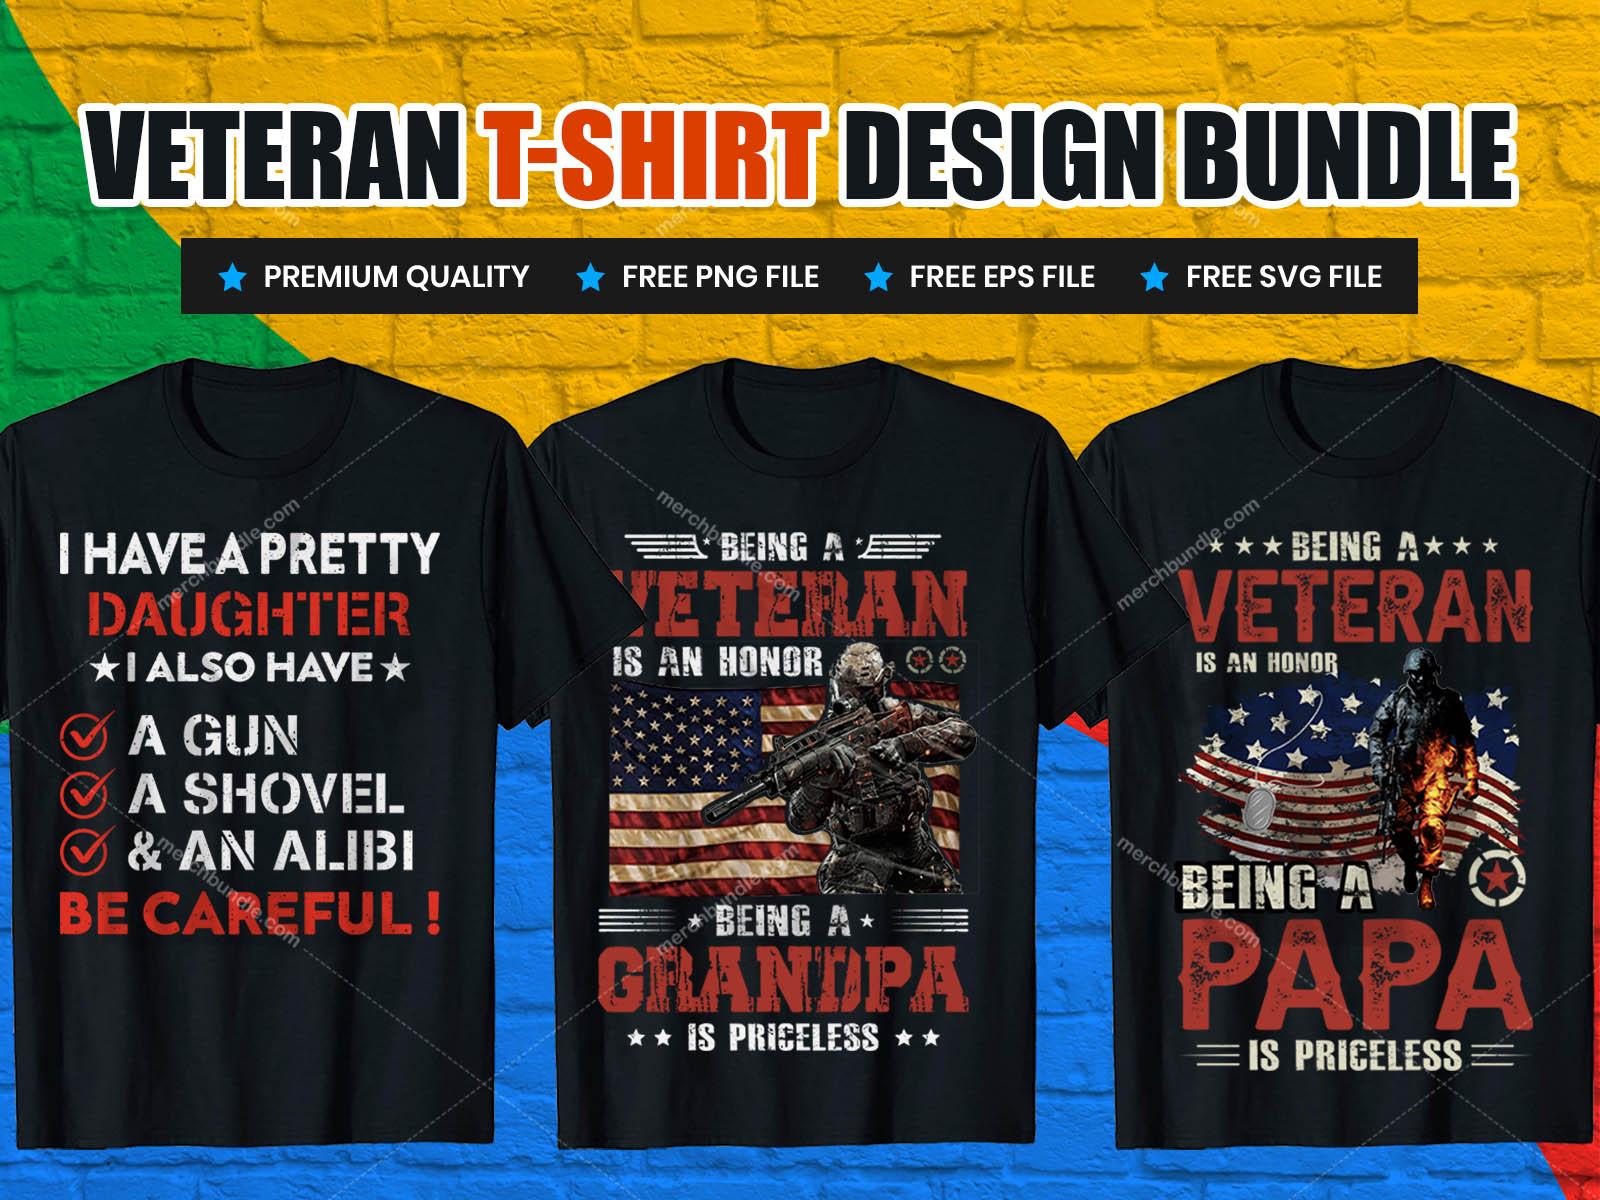 Veterans day print ready vector t shirt design. American flag with Veterans vector illustration.Pair of combat boots, military helmet and USA flag, vintage t shirt design vector. Memorial day t-shirt 